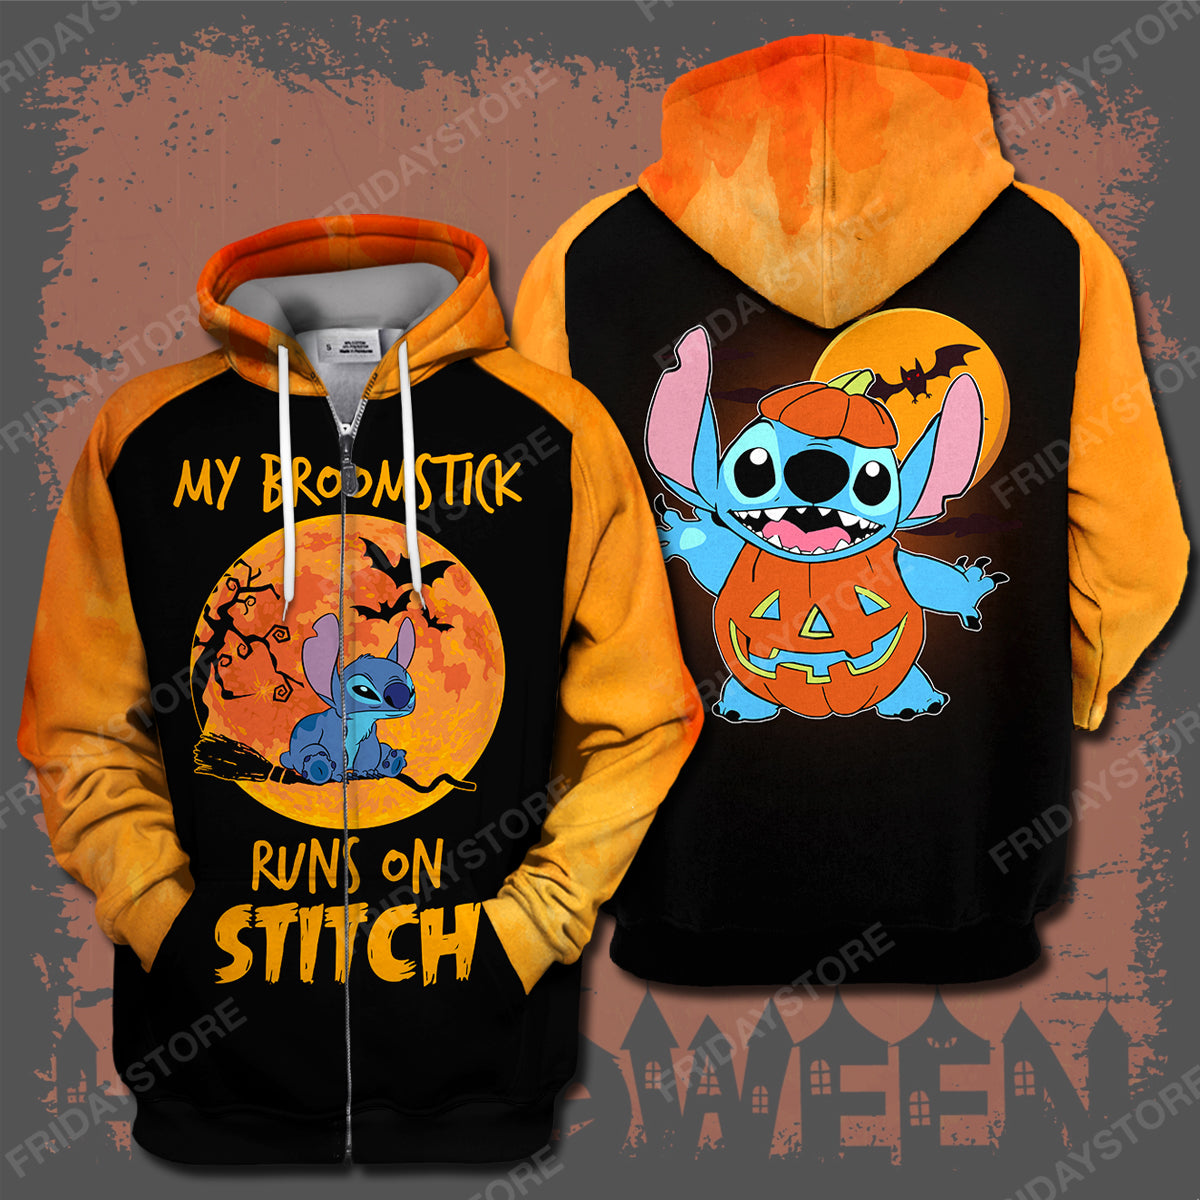 Unifinz LAS T-shirt My Broomstick Runs On Stitch T-shirt Awesome High Quality DN Stitch Hoodie Sweater Tank 2026